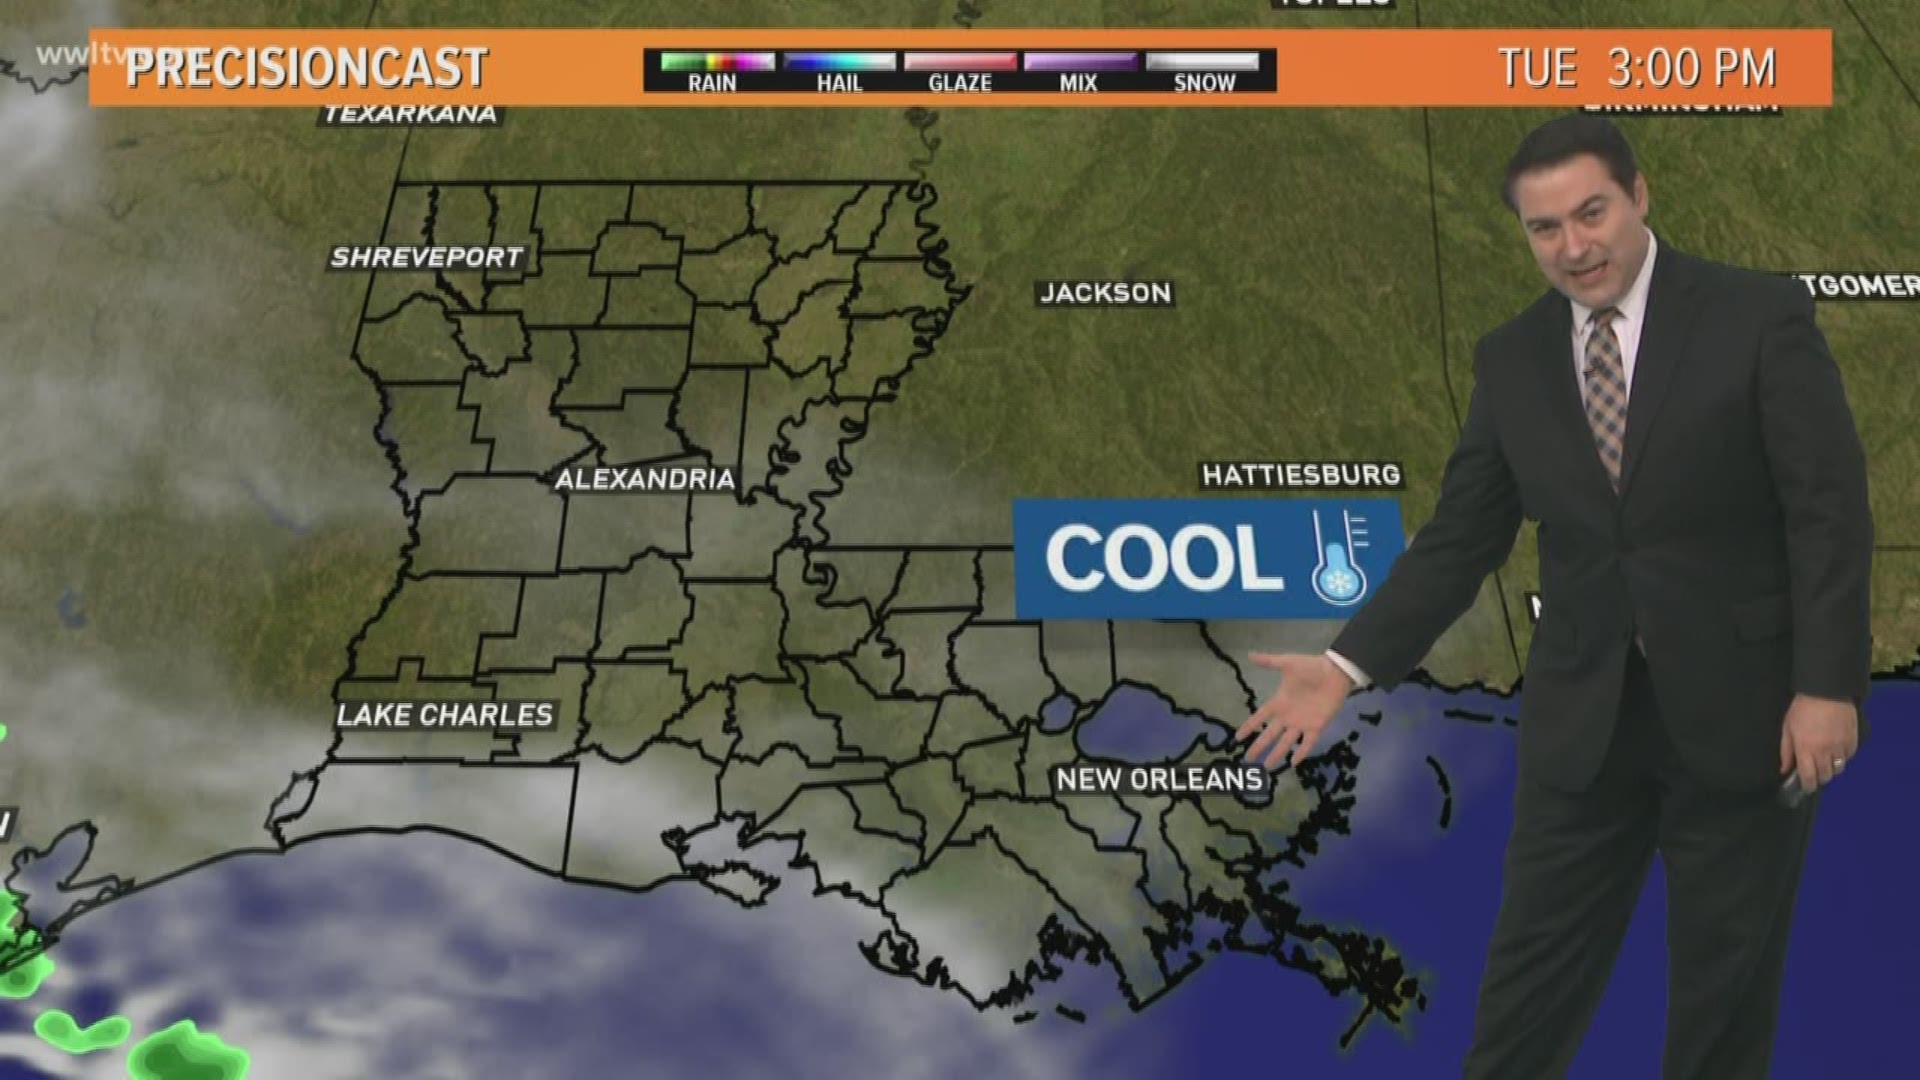 Meteorologist Dave Nussbaum says the sunshine will return today with cool temperatures across the New Orleans area.